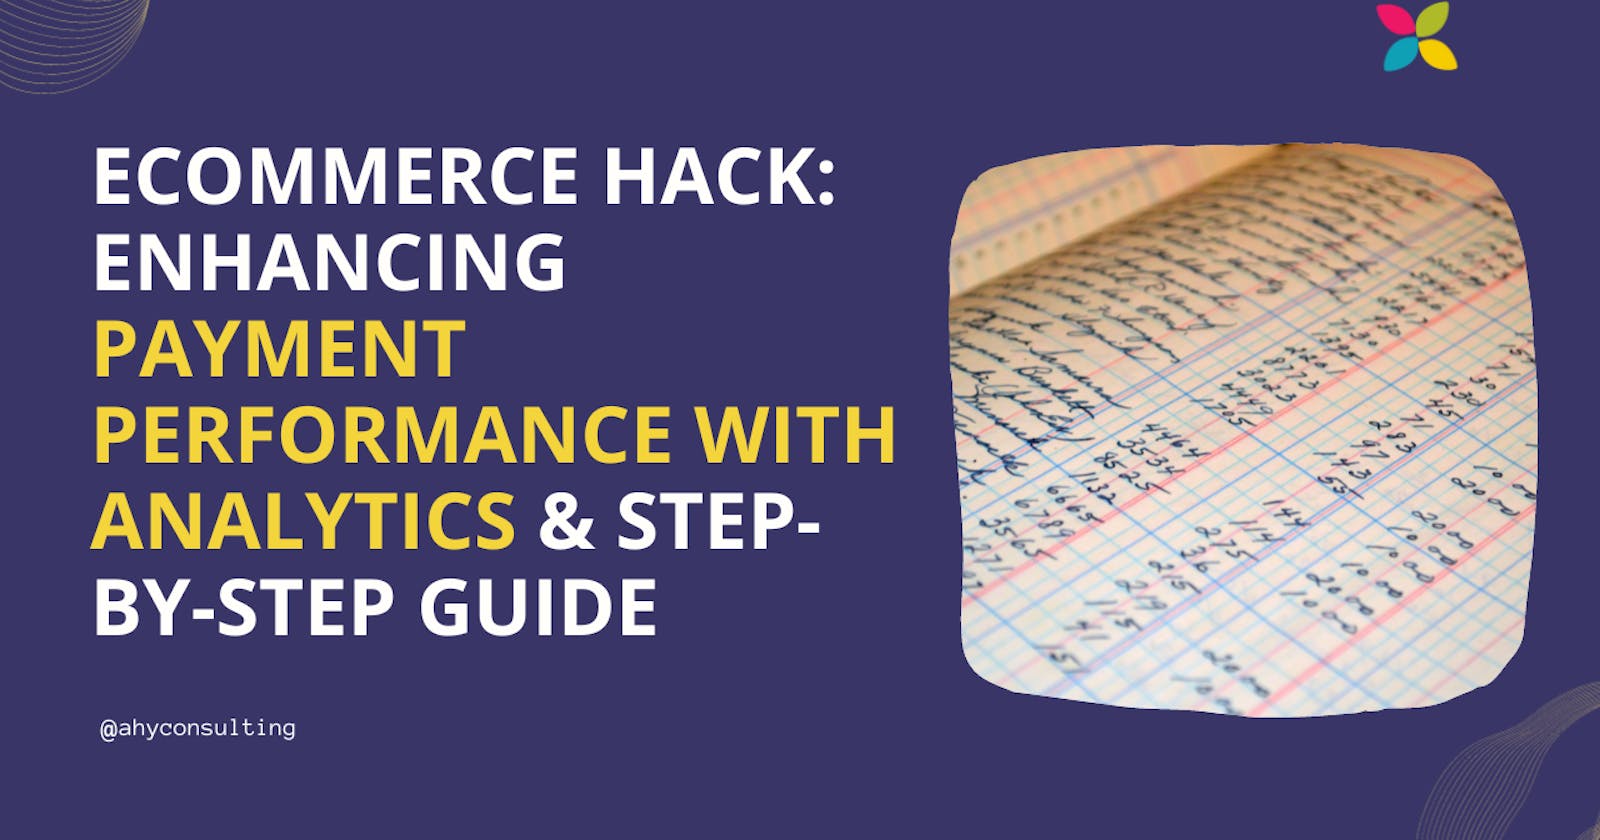 Enhancing Payment Performance with Analytics: A Step-by-Step Guide